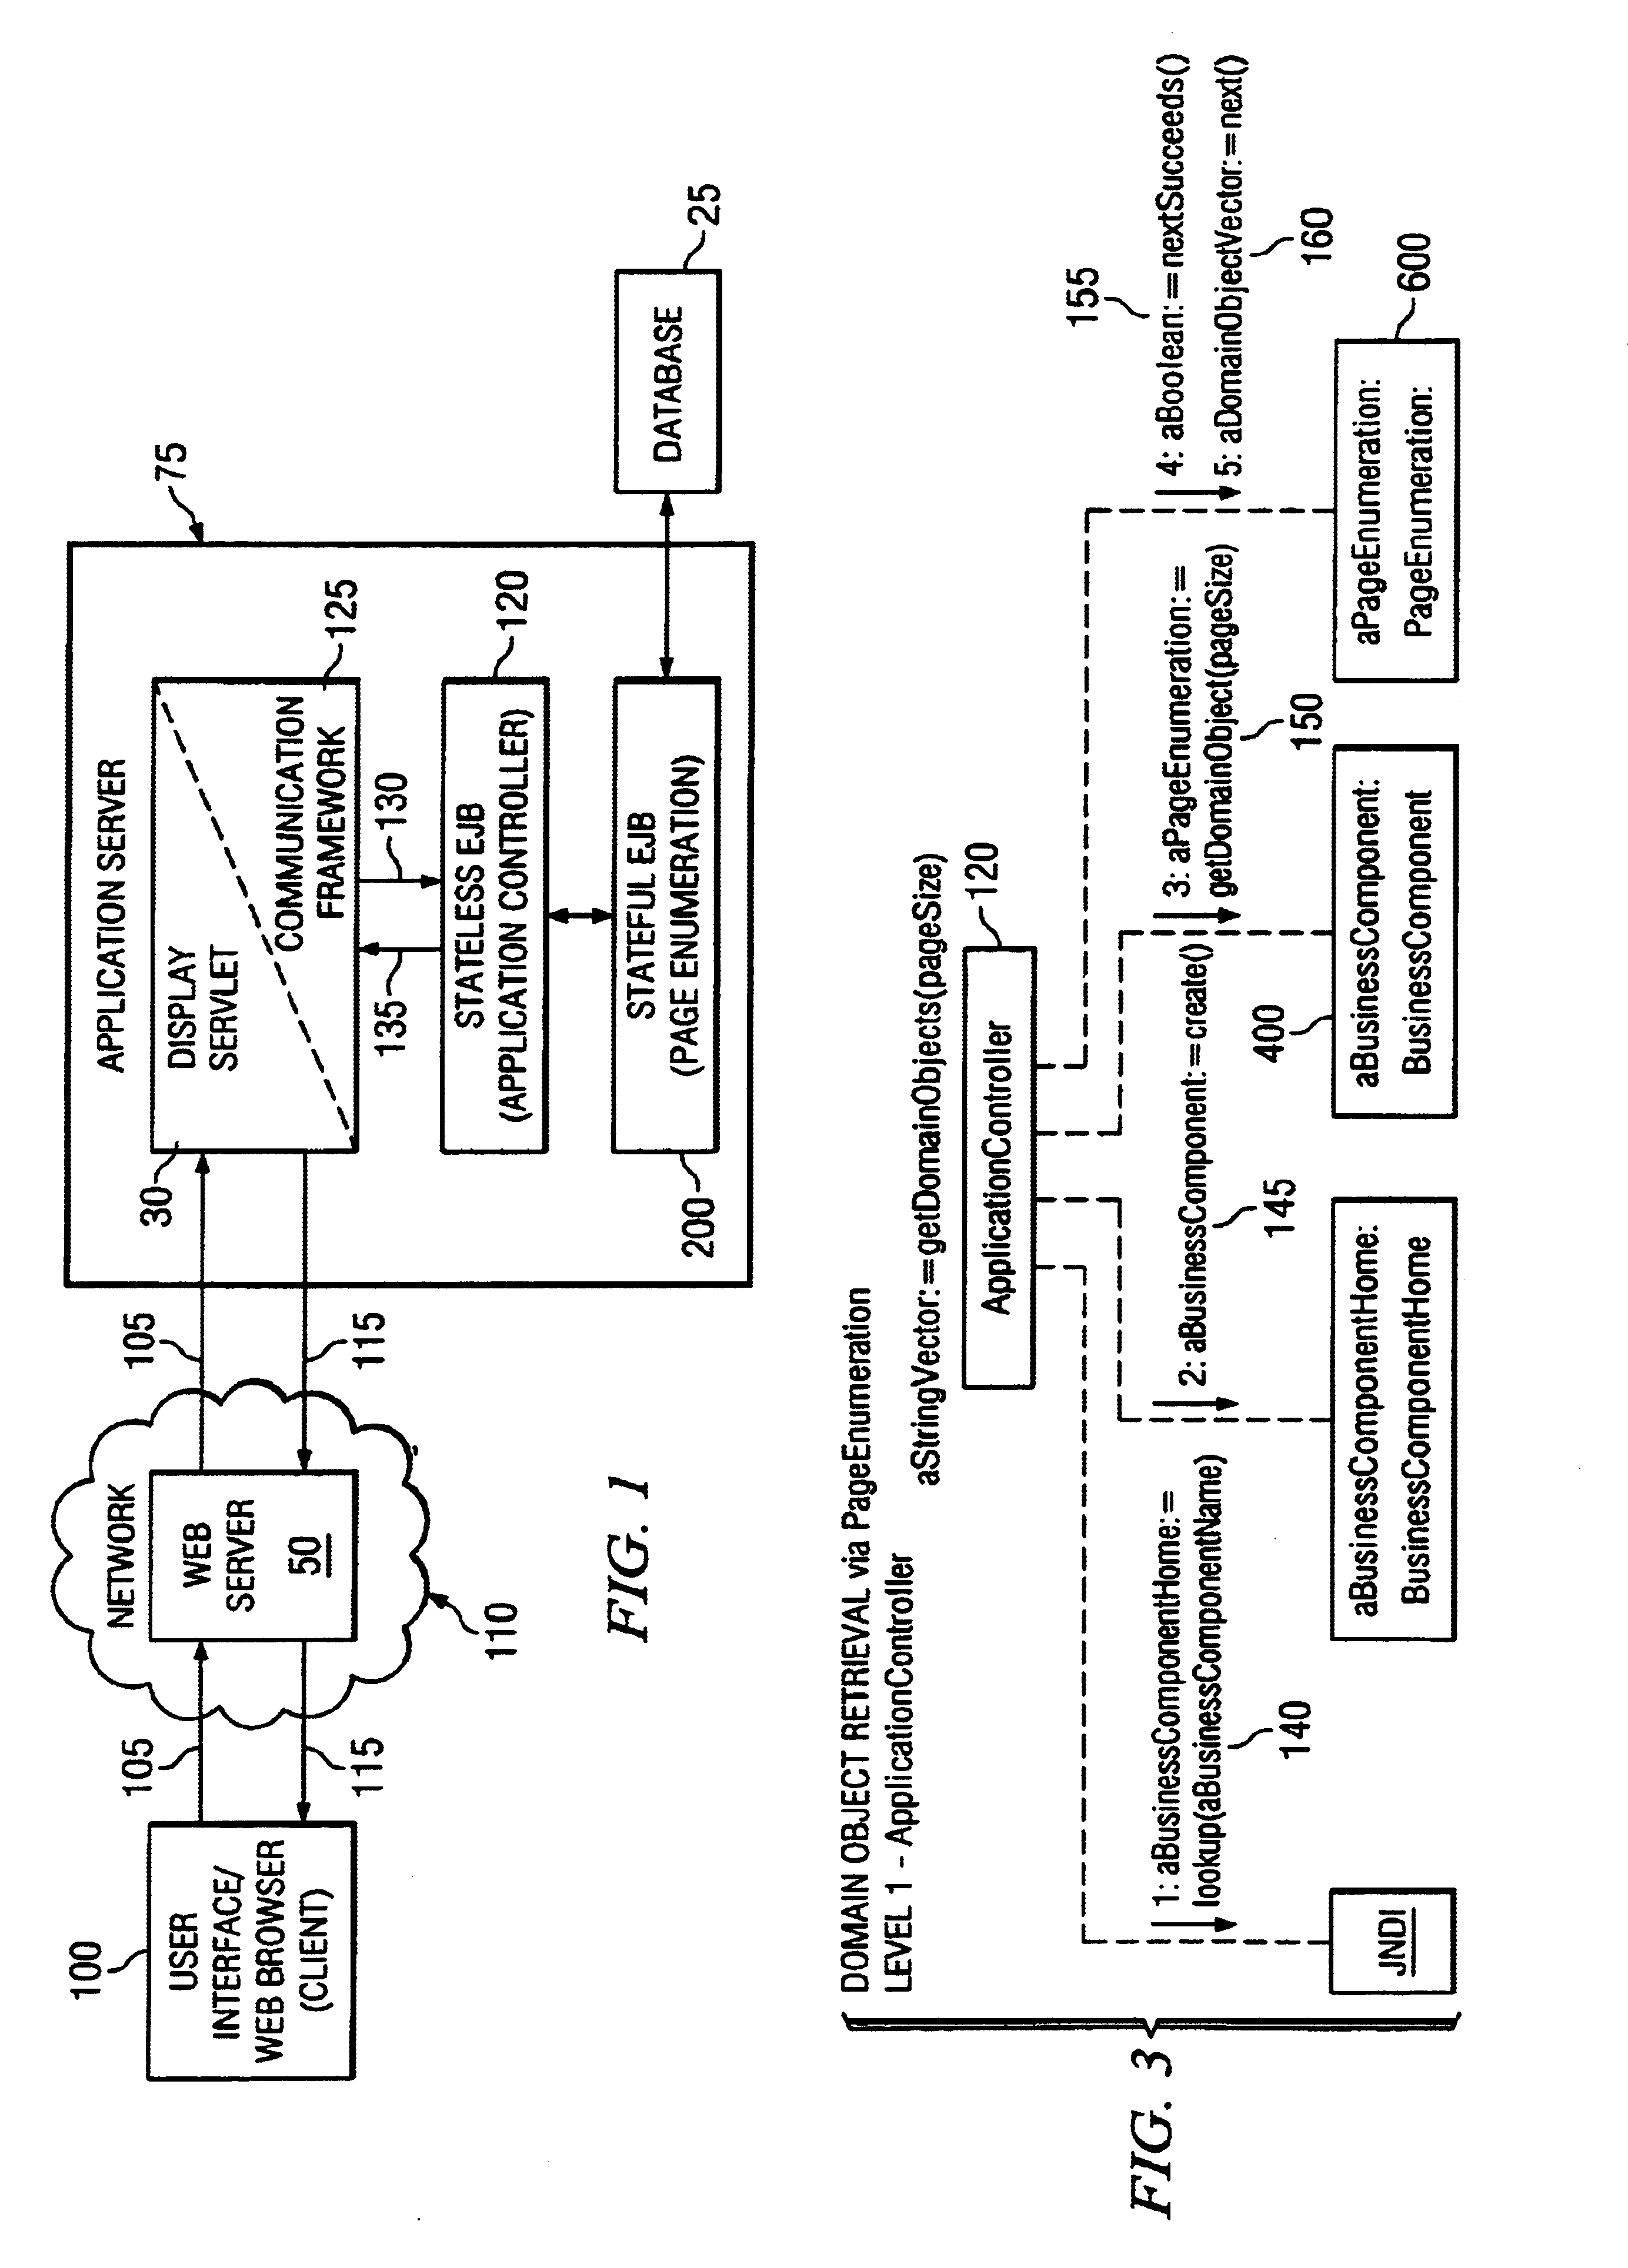 Method for enumerating data pages in a stateless, distributed computing environment